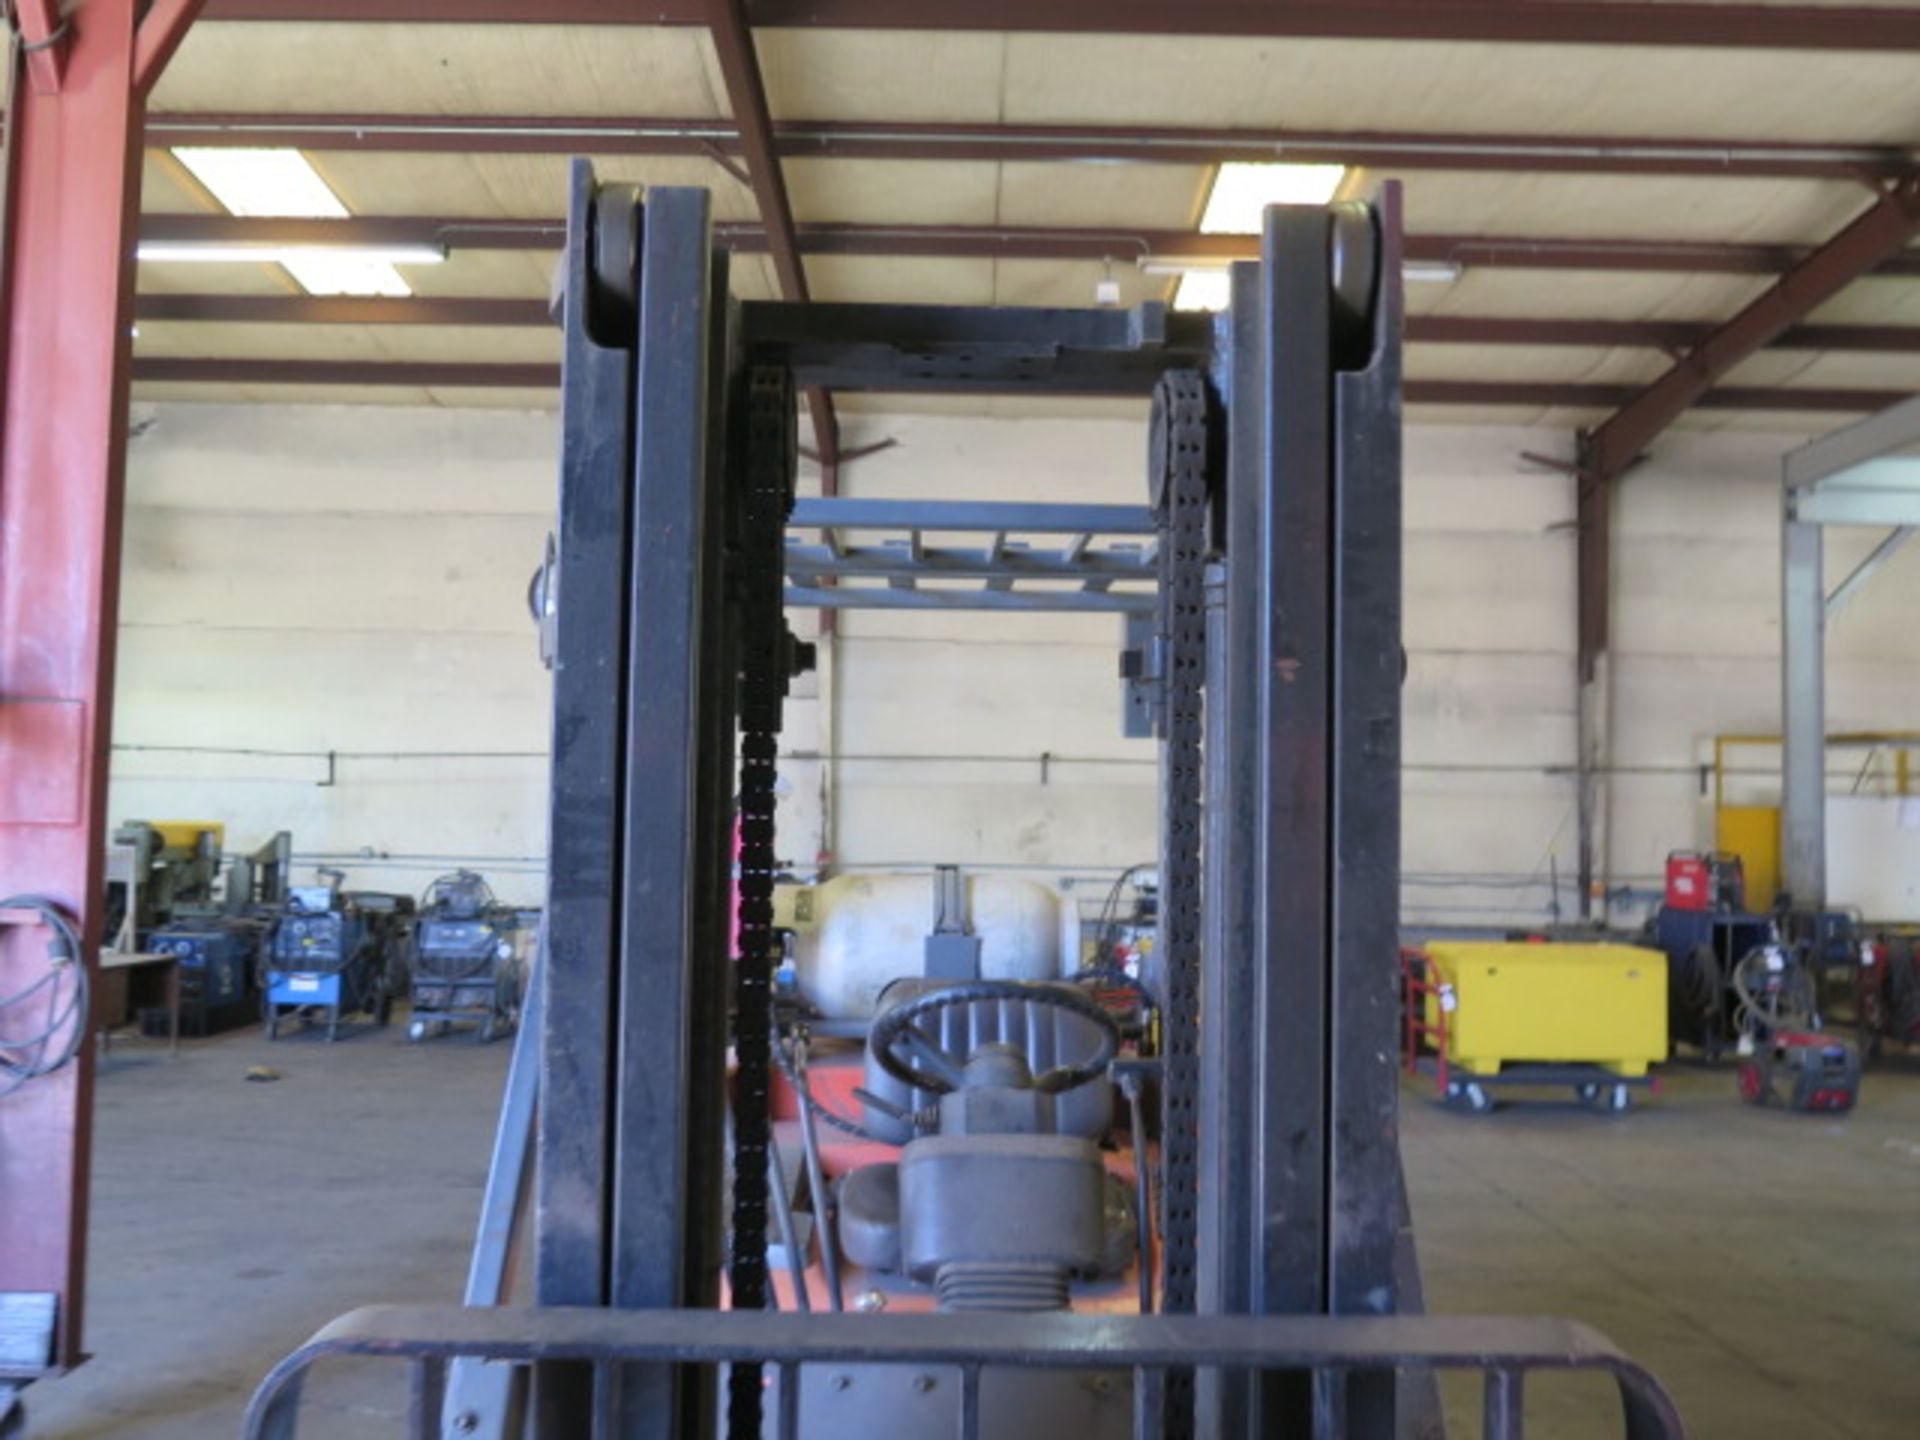 Toyota 52-6FGCU35 8000 Lb Cap LPG Forklift s/n 60547 w/ 2-Stage Mast, 131" Lift Height, SOLD AS IS - Image 5 of 13